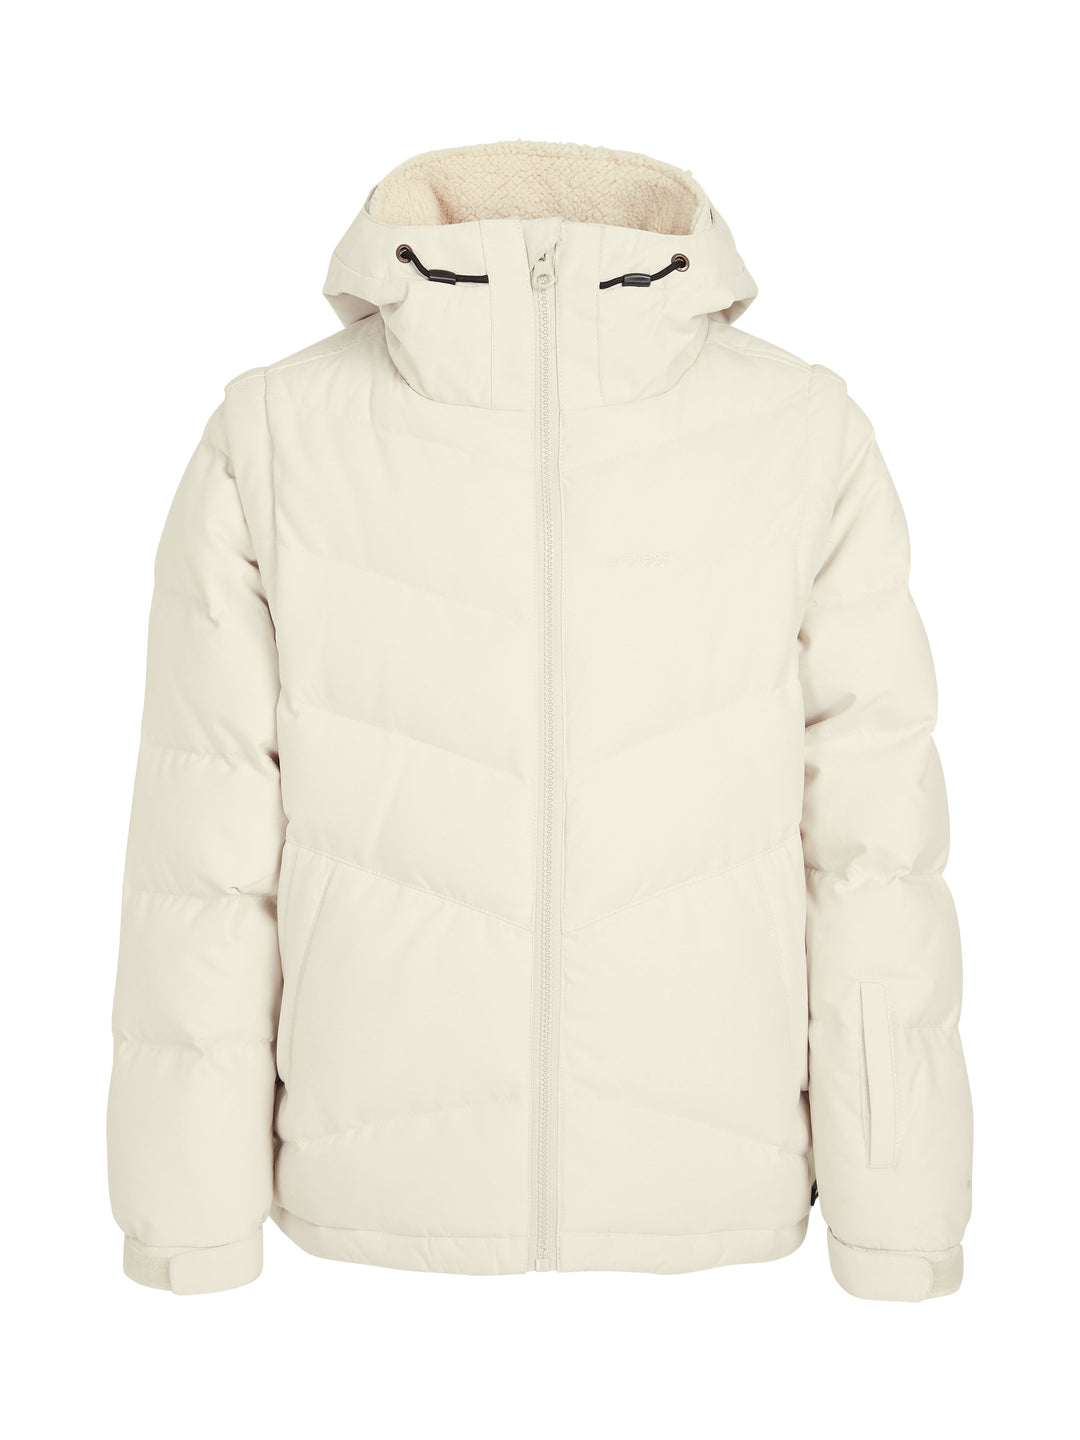 Protest Soof Girl's Snow Jacket